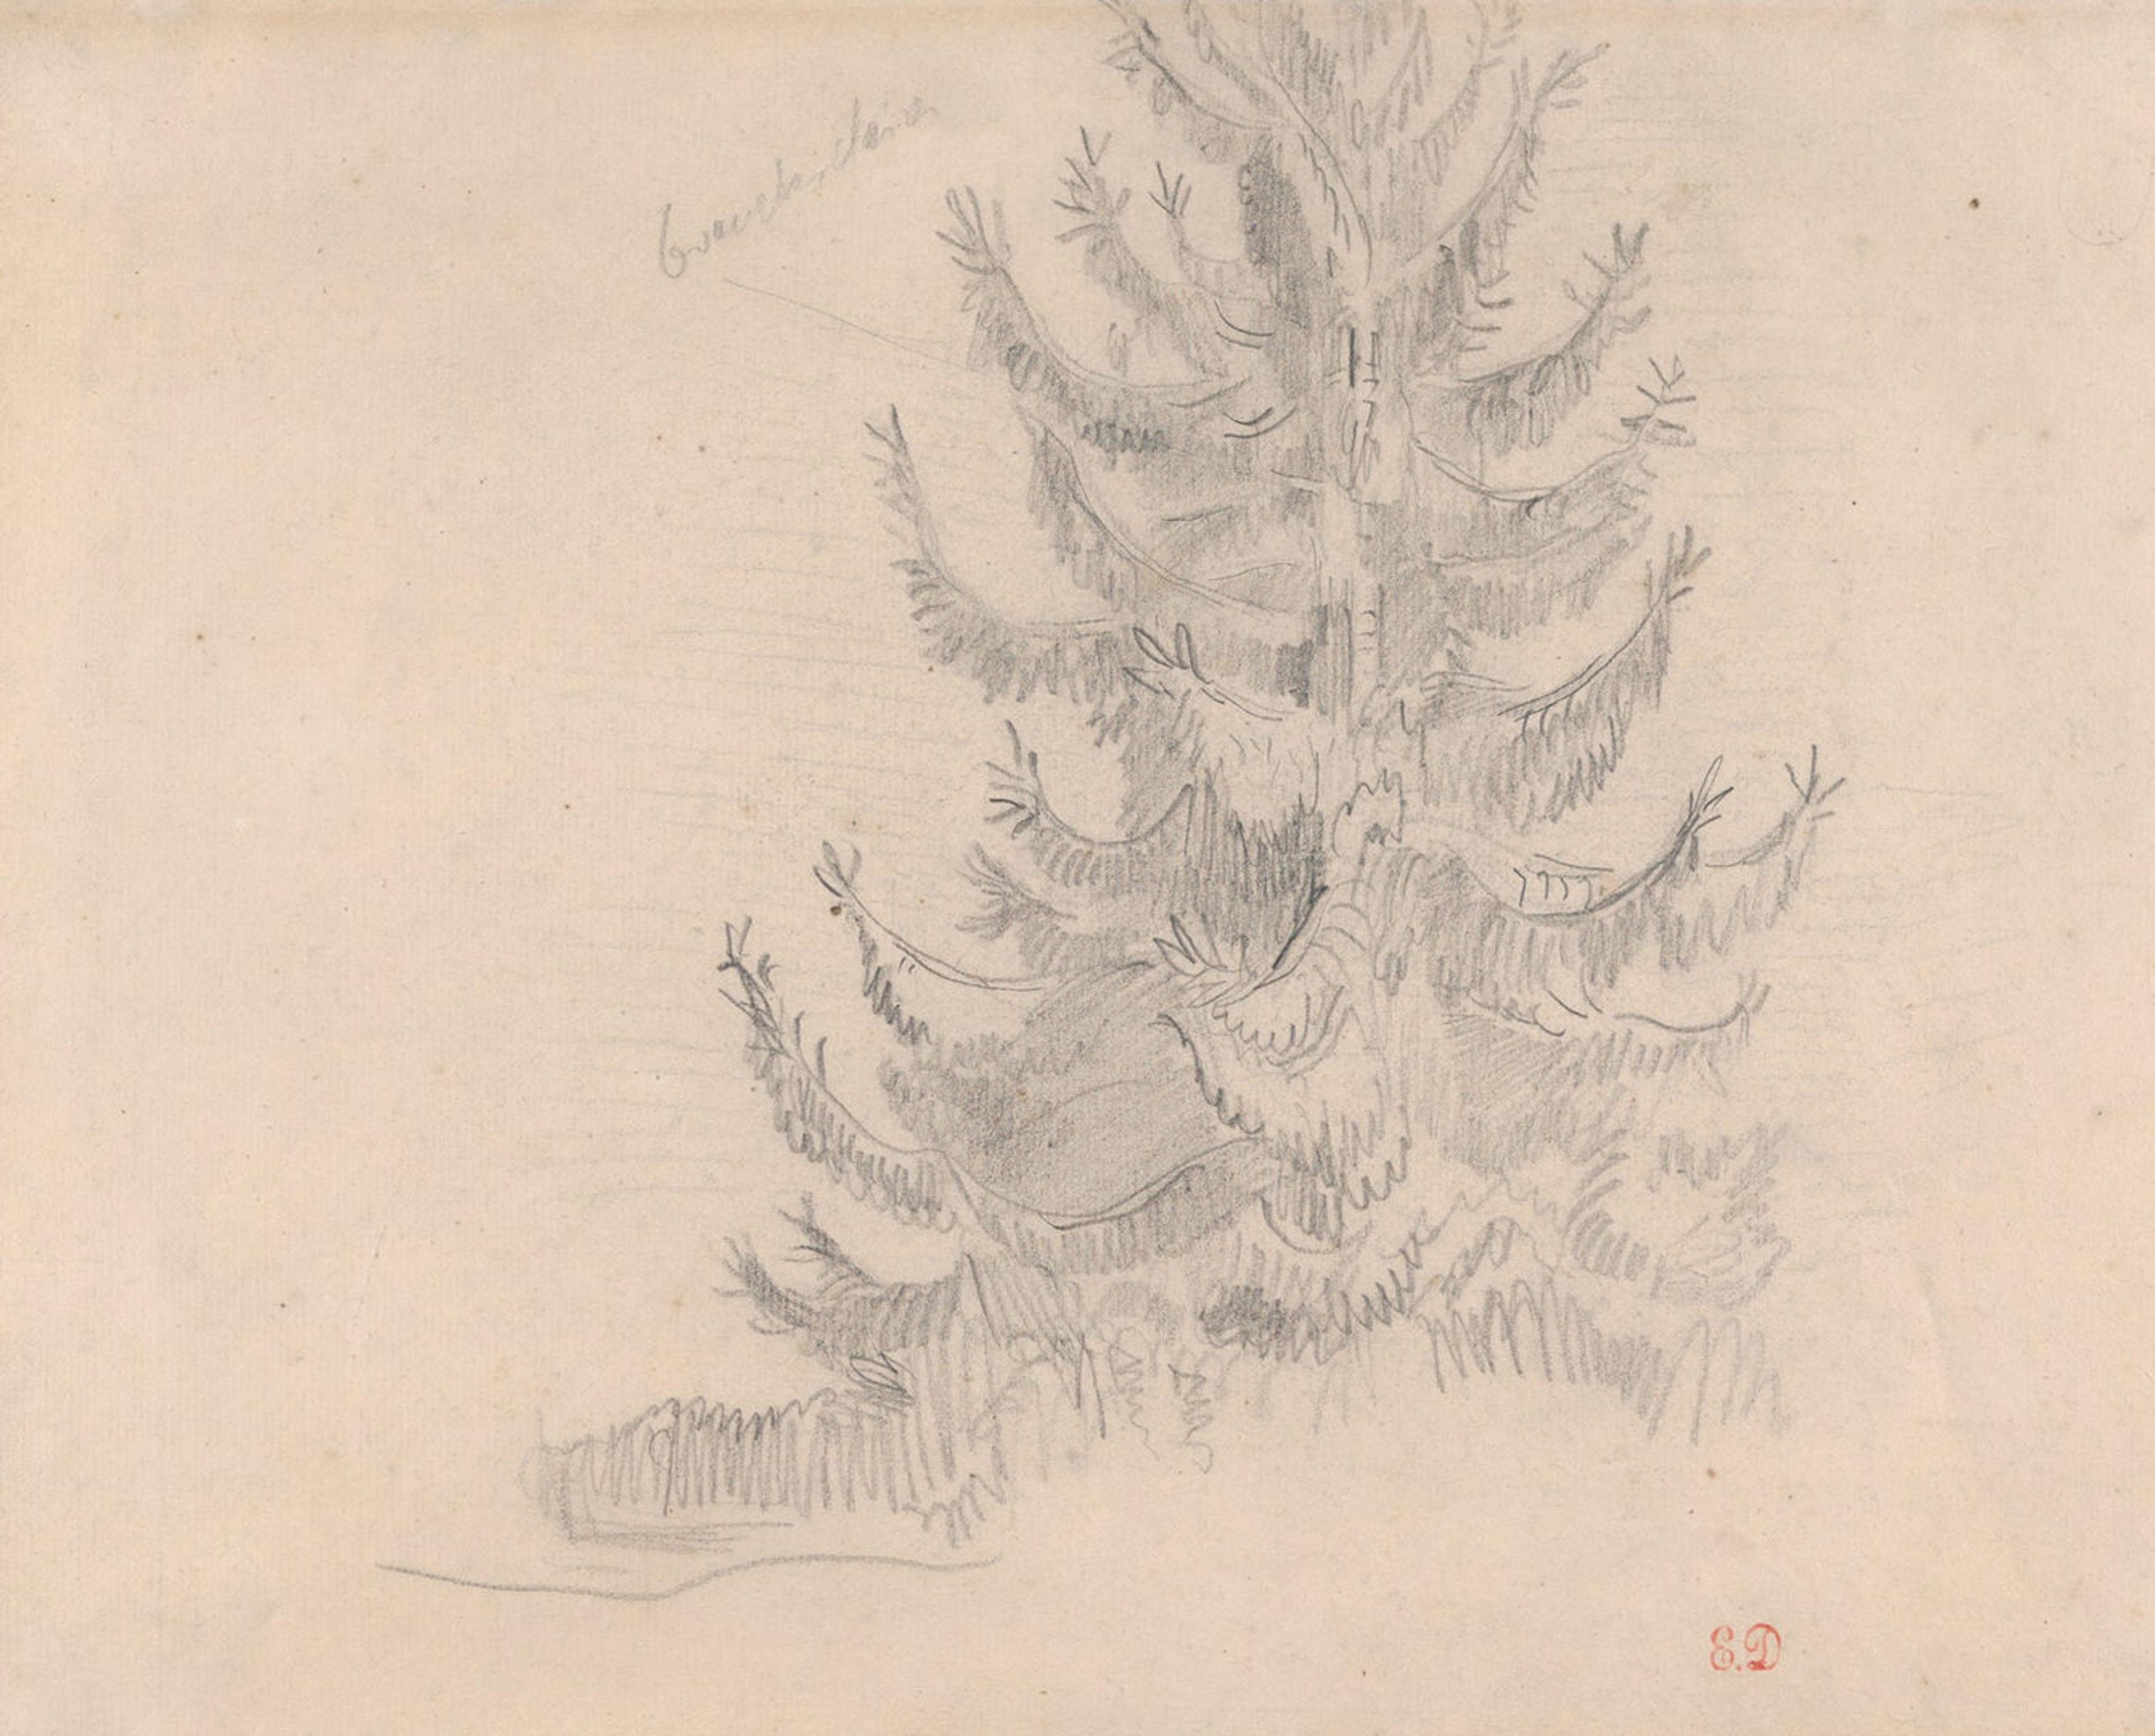 Delacroix drawing of a fir tree